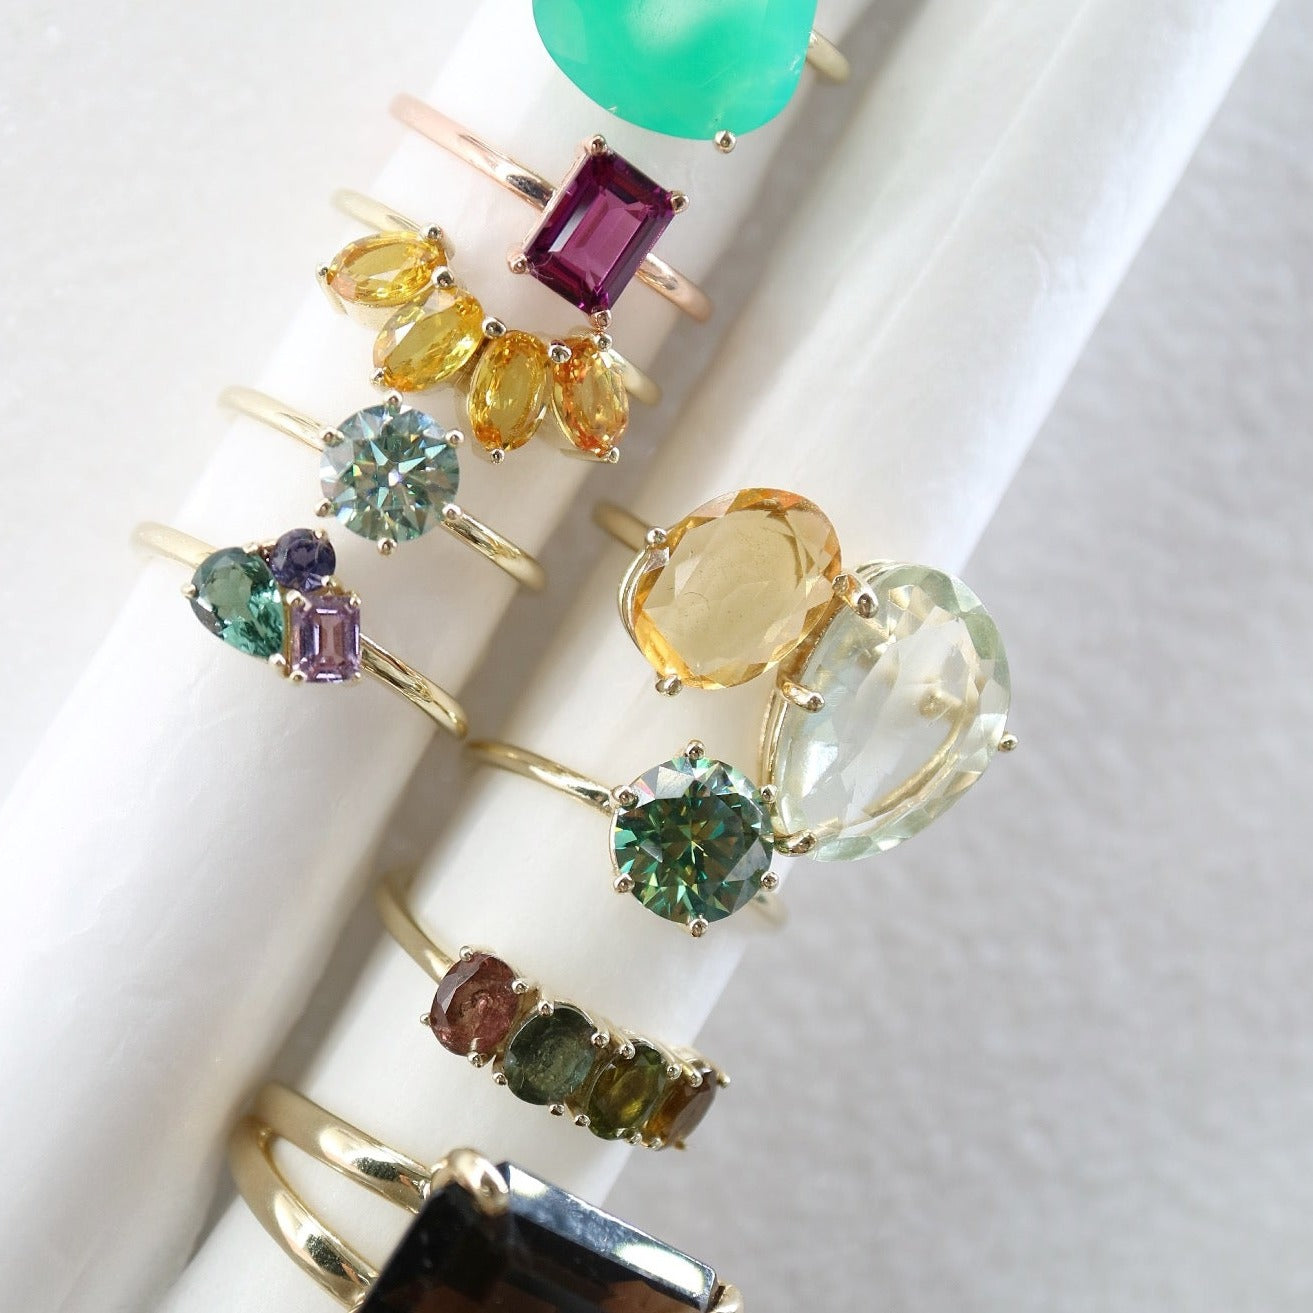 Sold statement rings